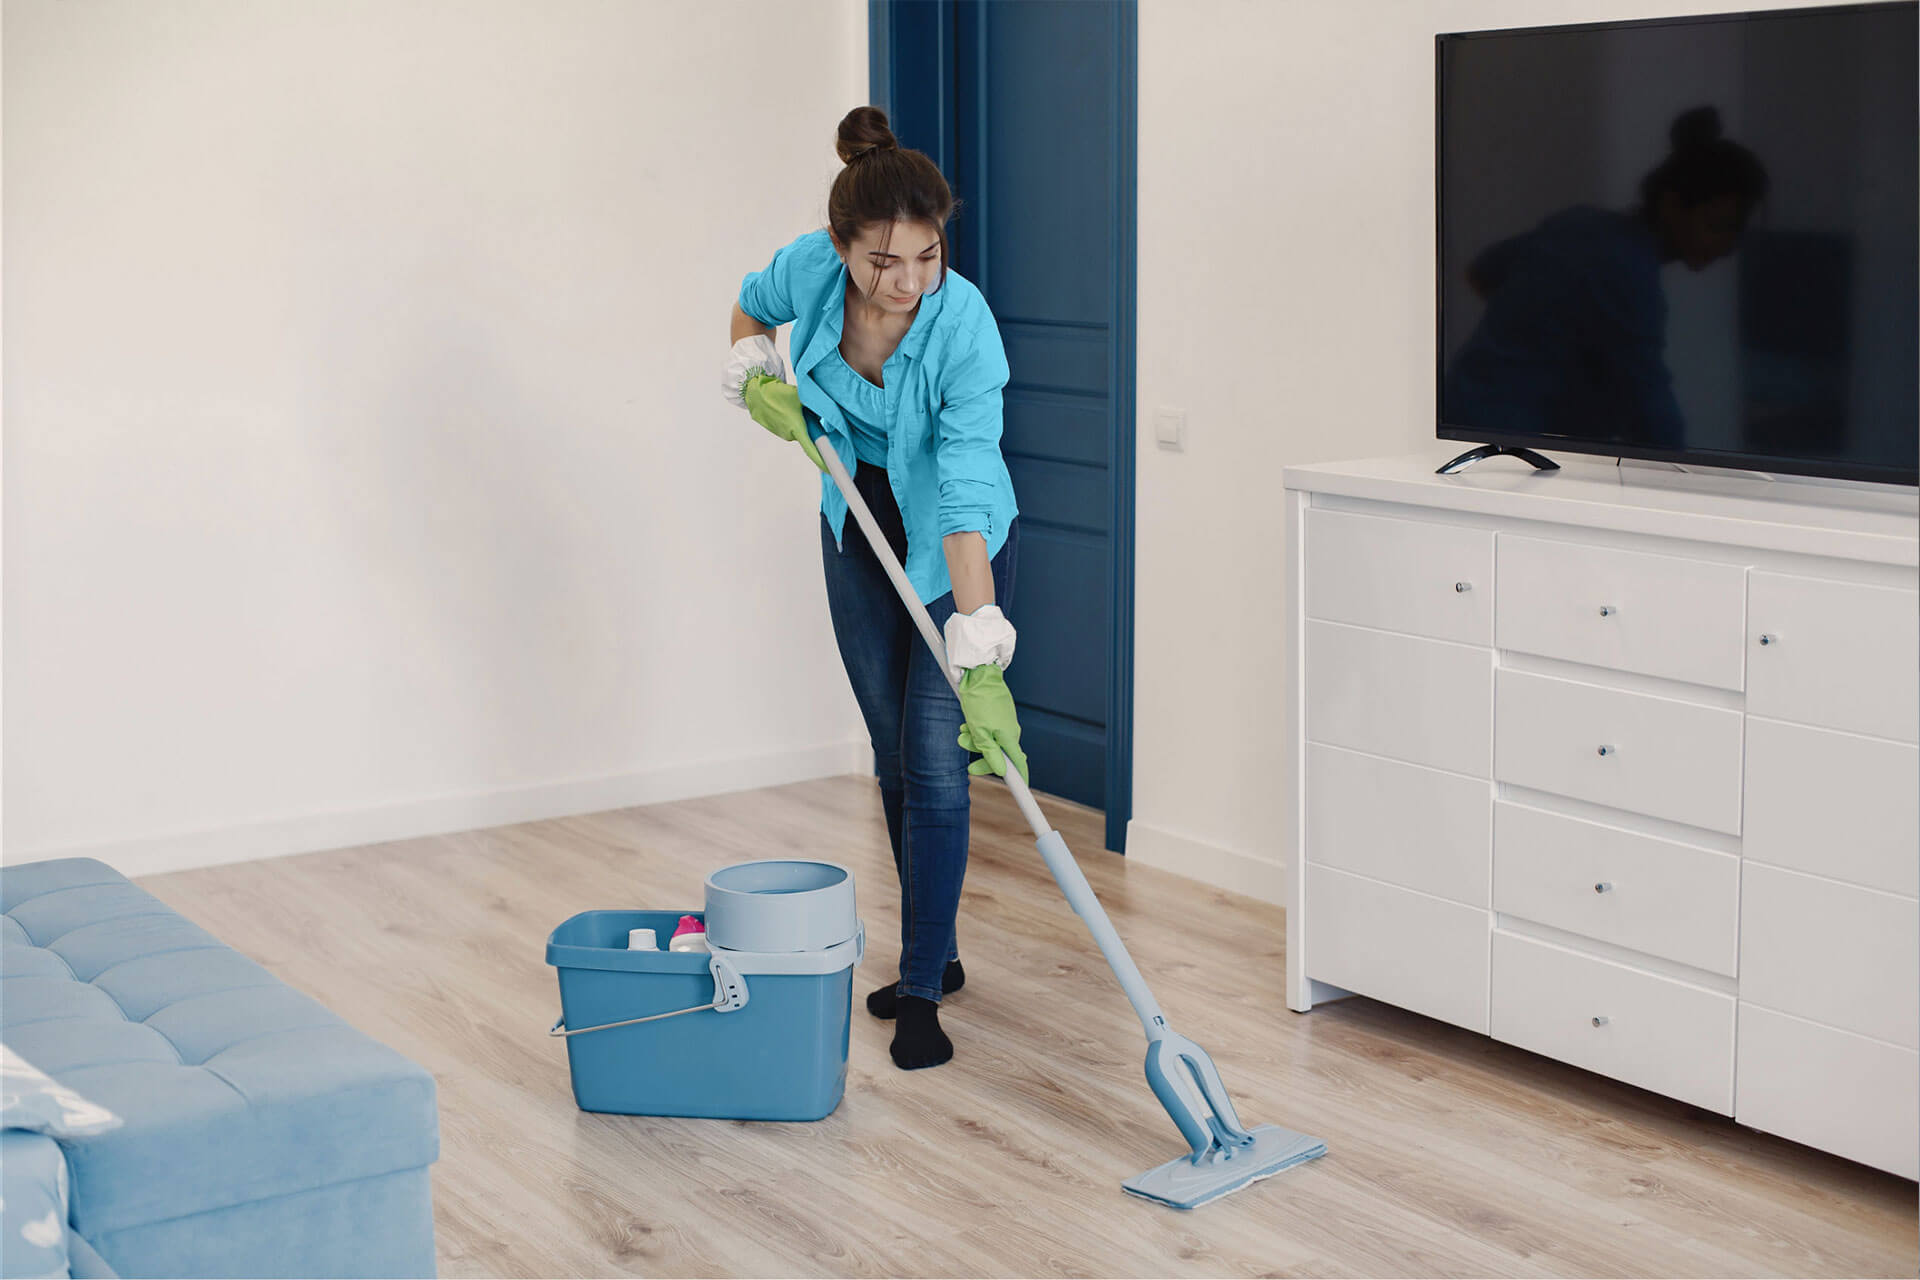 A maid from Texas cleans a living room with a mop